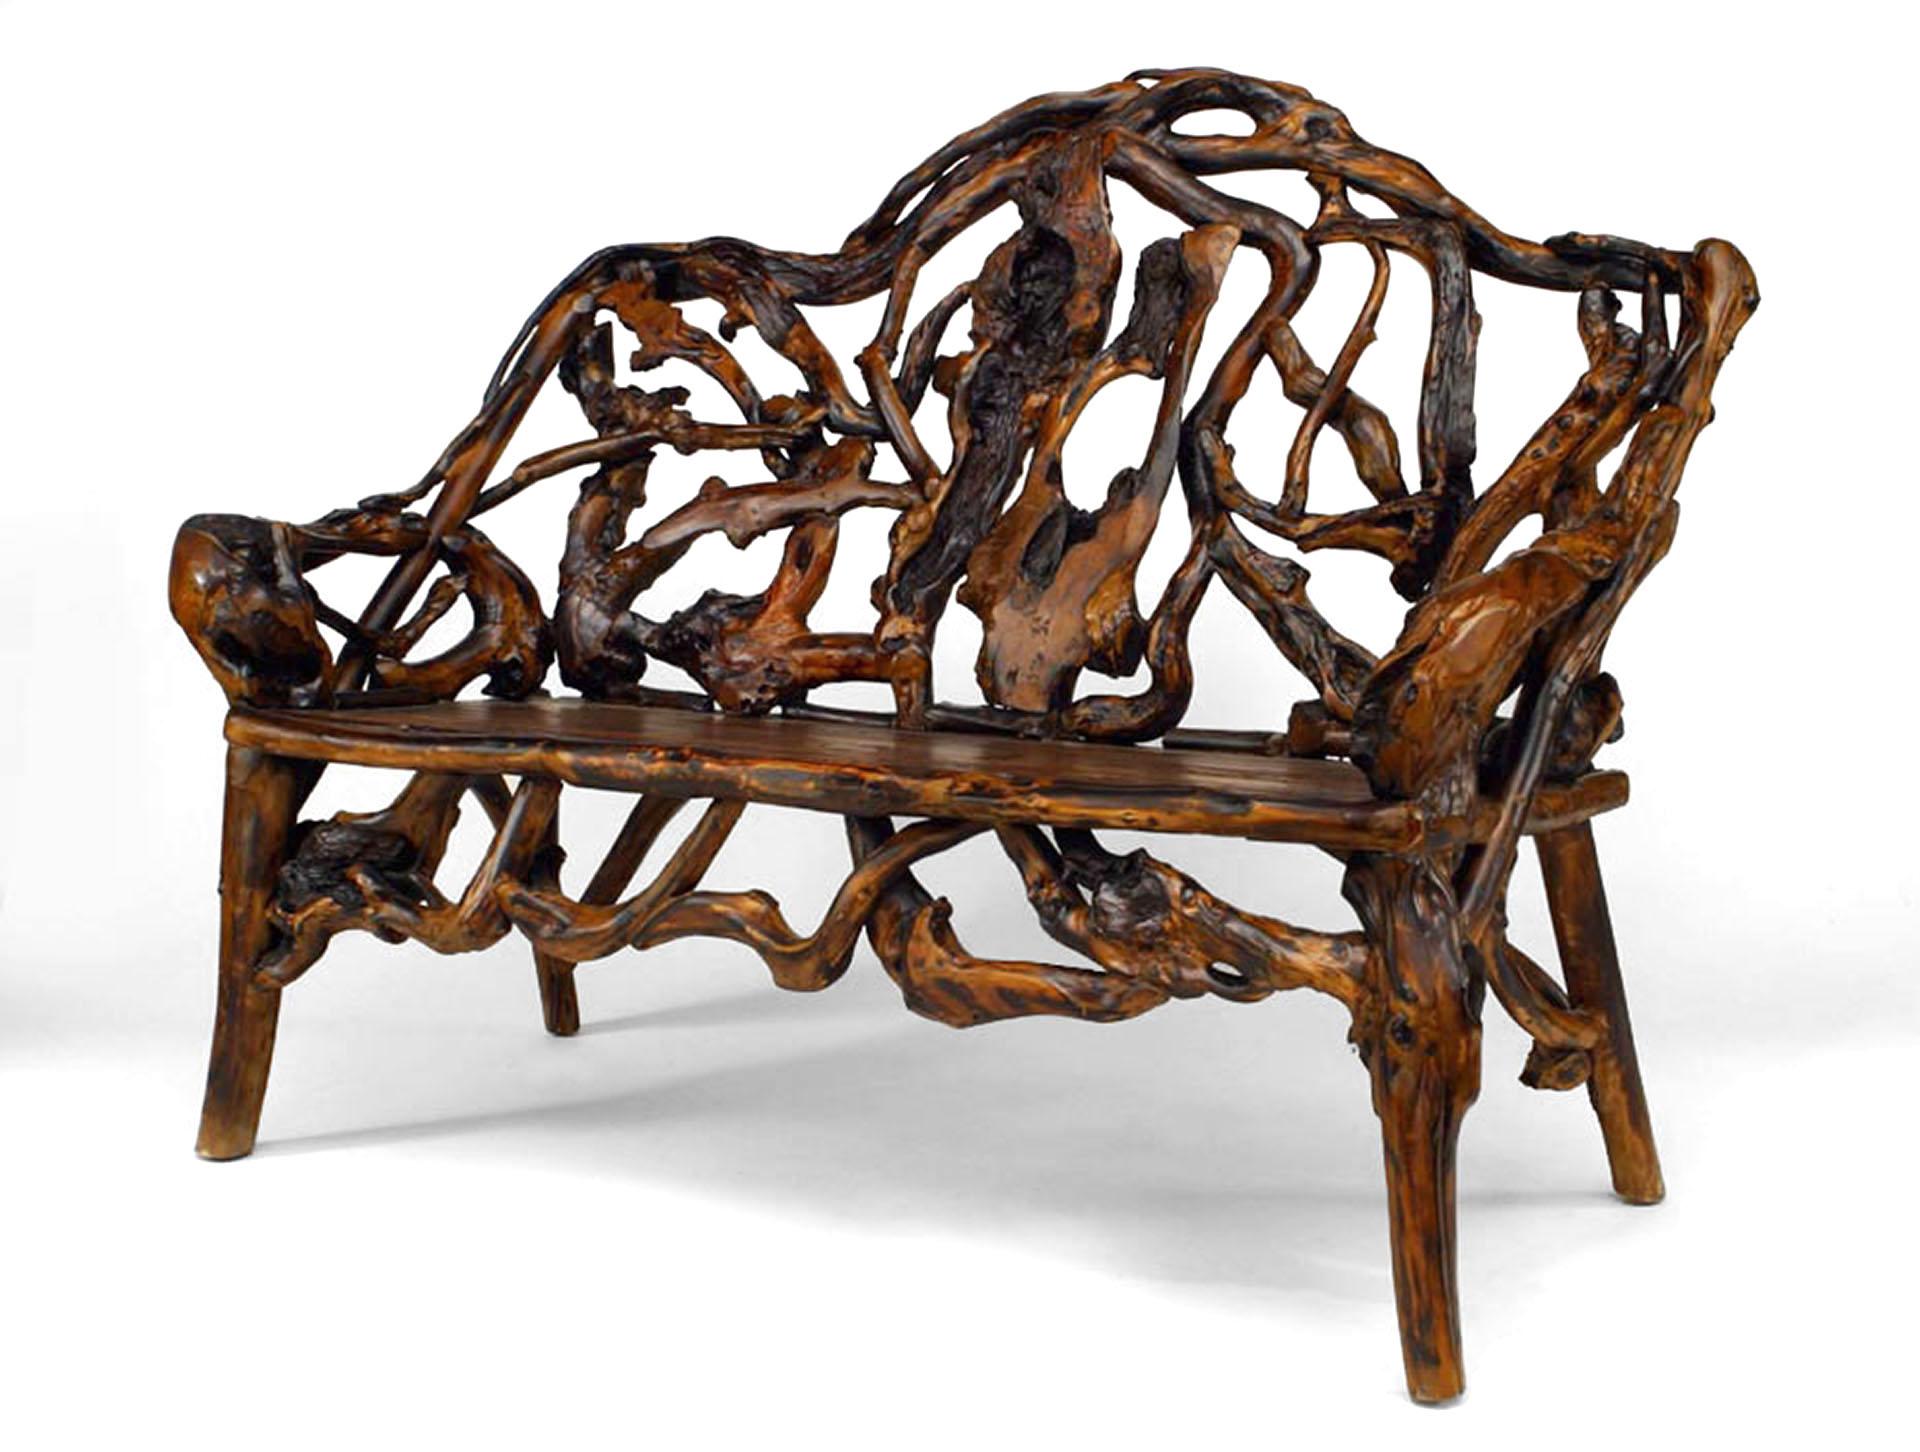 2 Similar Rustic Adirondack style (20th Cent) root loveseats with shaped filigree design back and arms with plank seat (PRICED EACH).
 